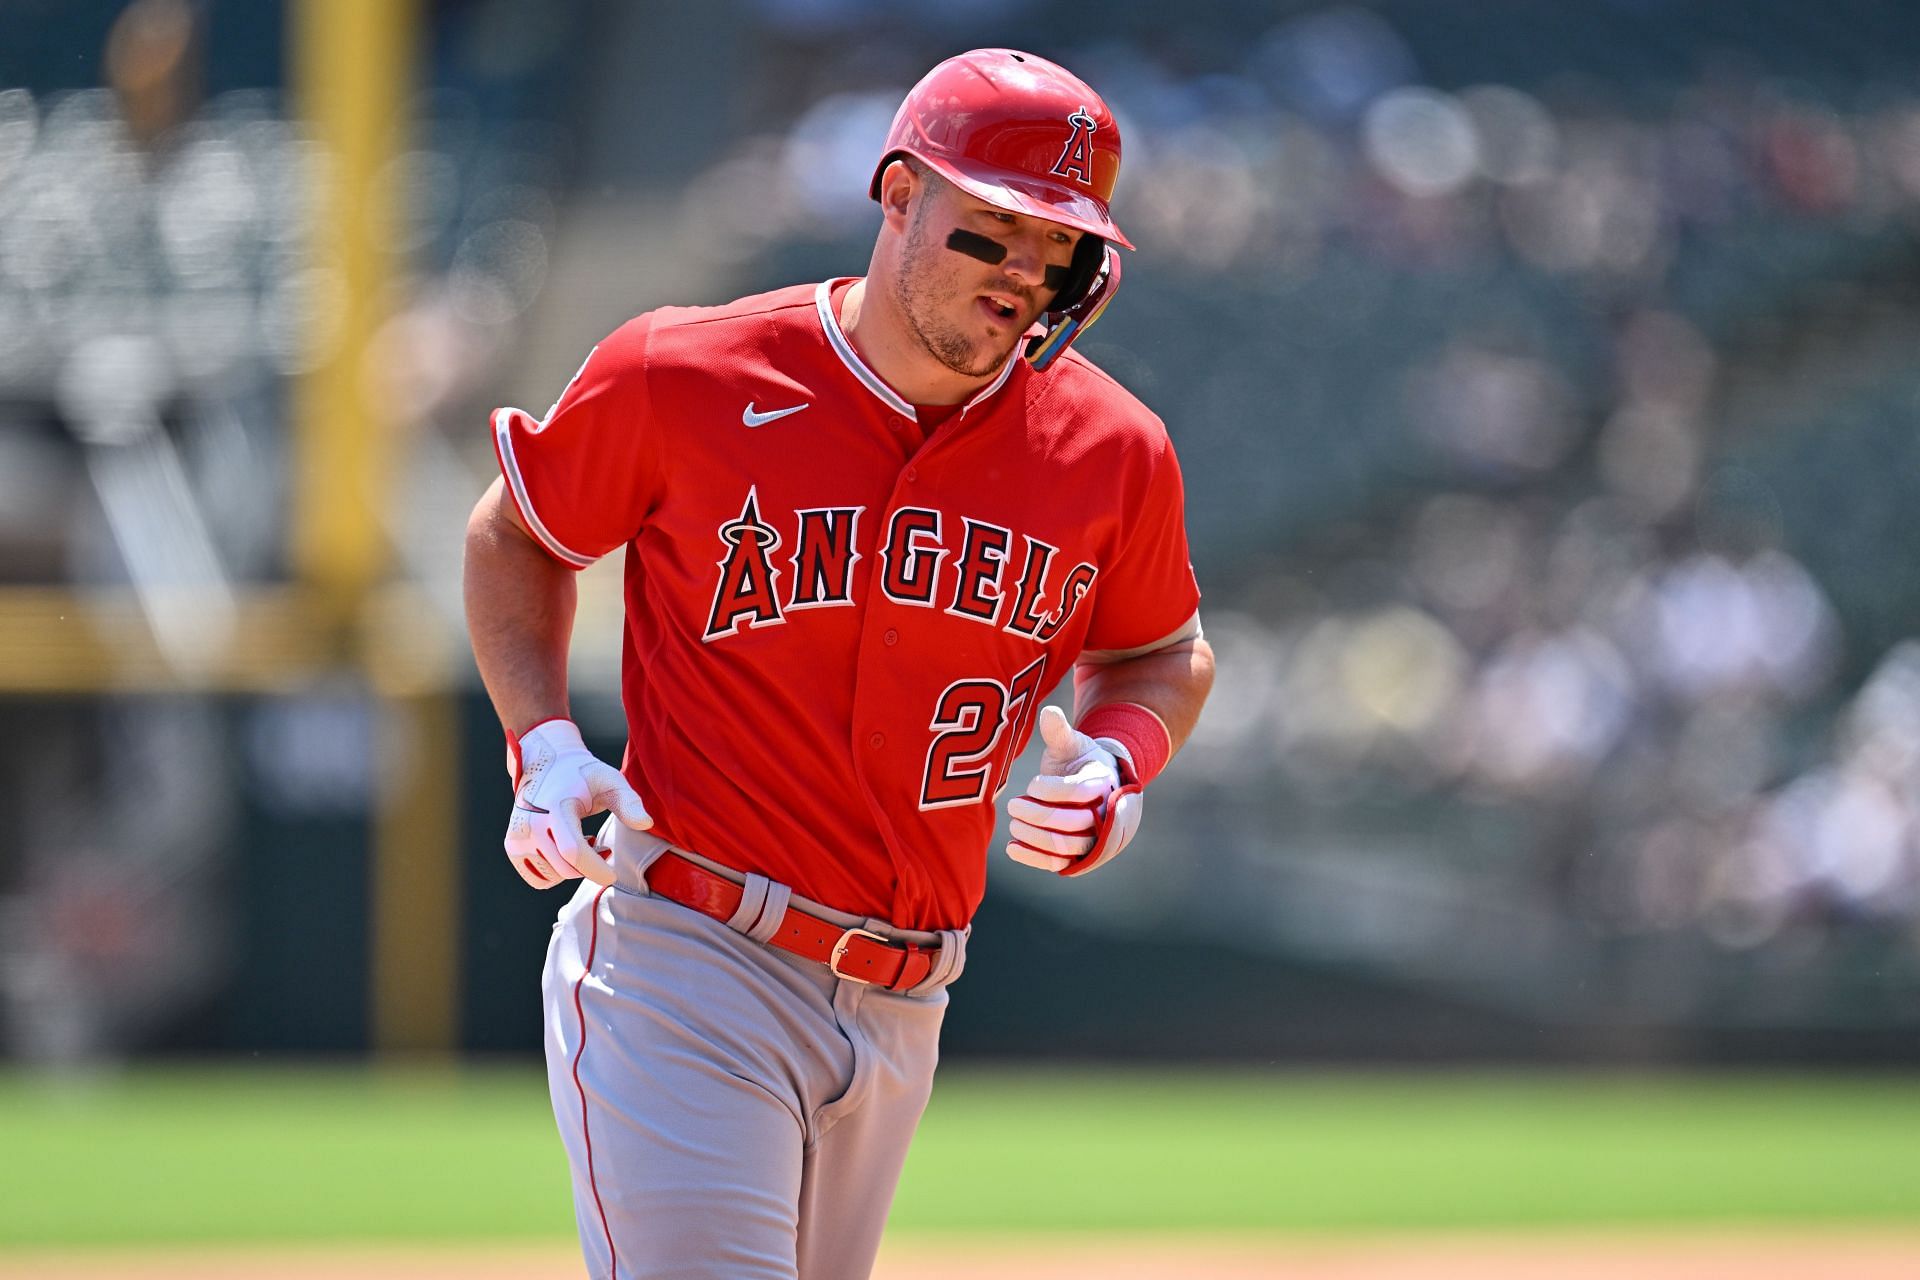 Mike Trout's 441-foot blast can't save Angels in home-opening loss